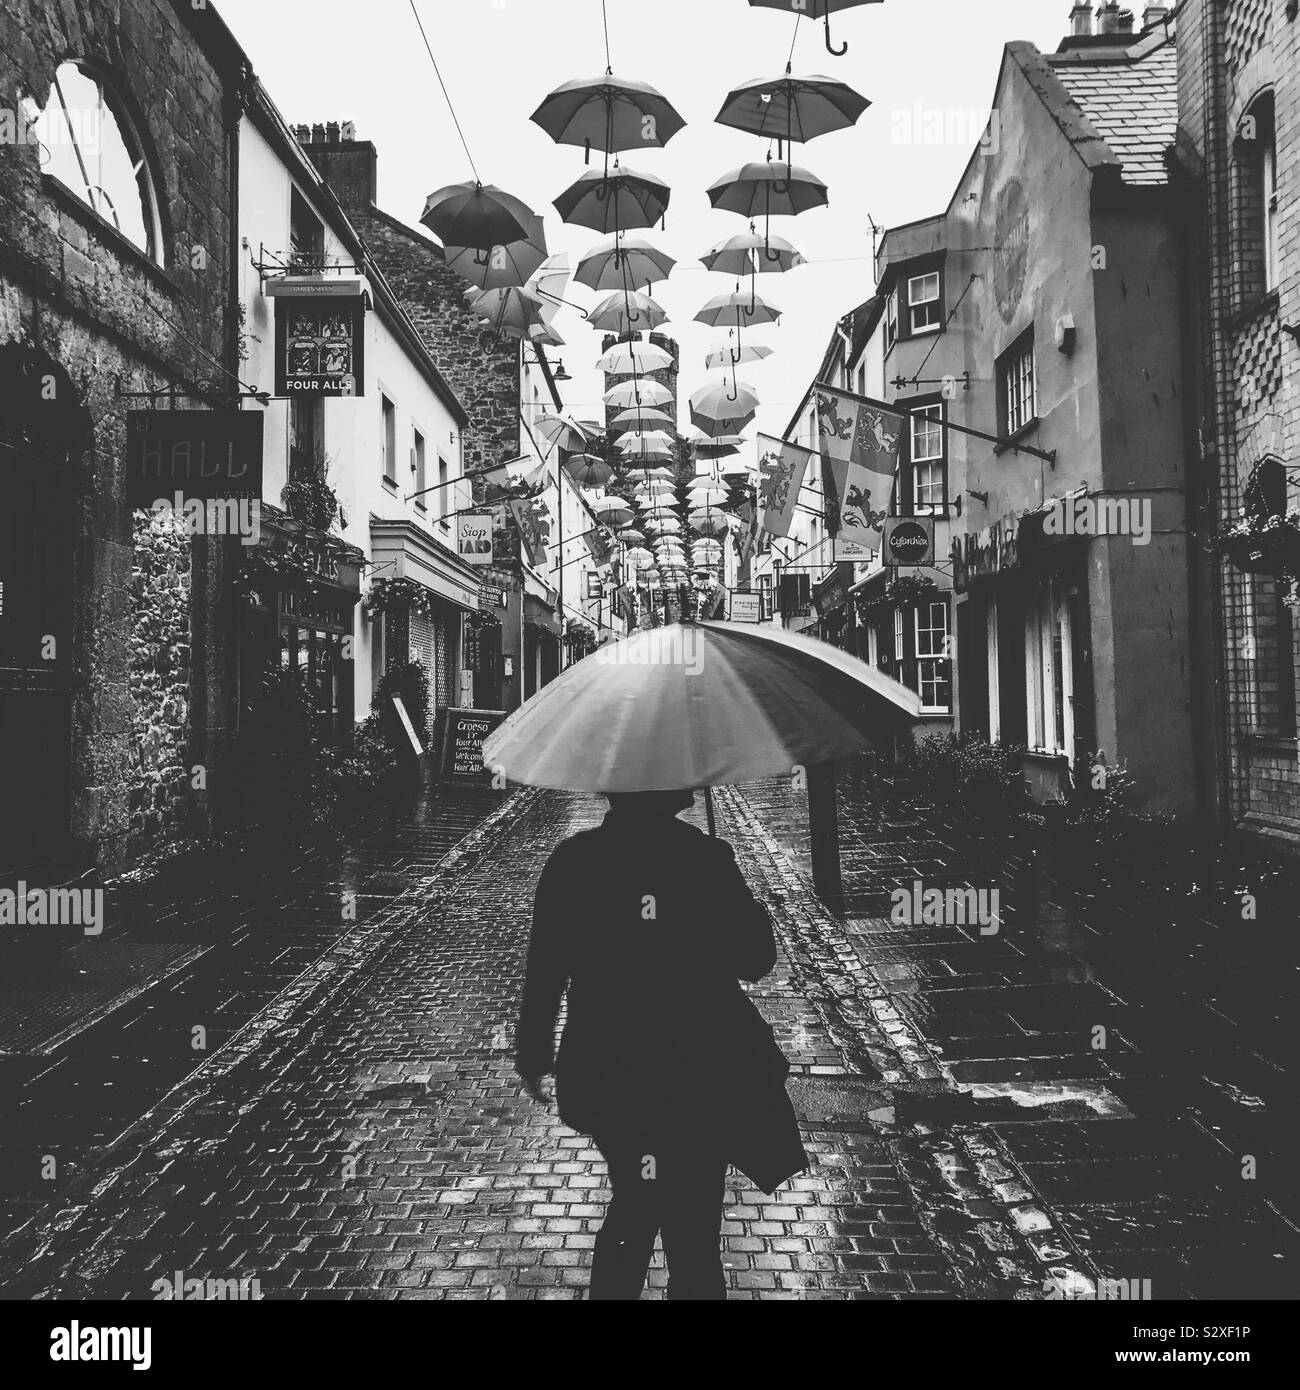 A rainy day down Palace Street in Caernarfon North Wales showing pedestrian carrying an umbrella underneath the 170 flying brollies art installation above Stock Photo